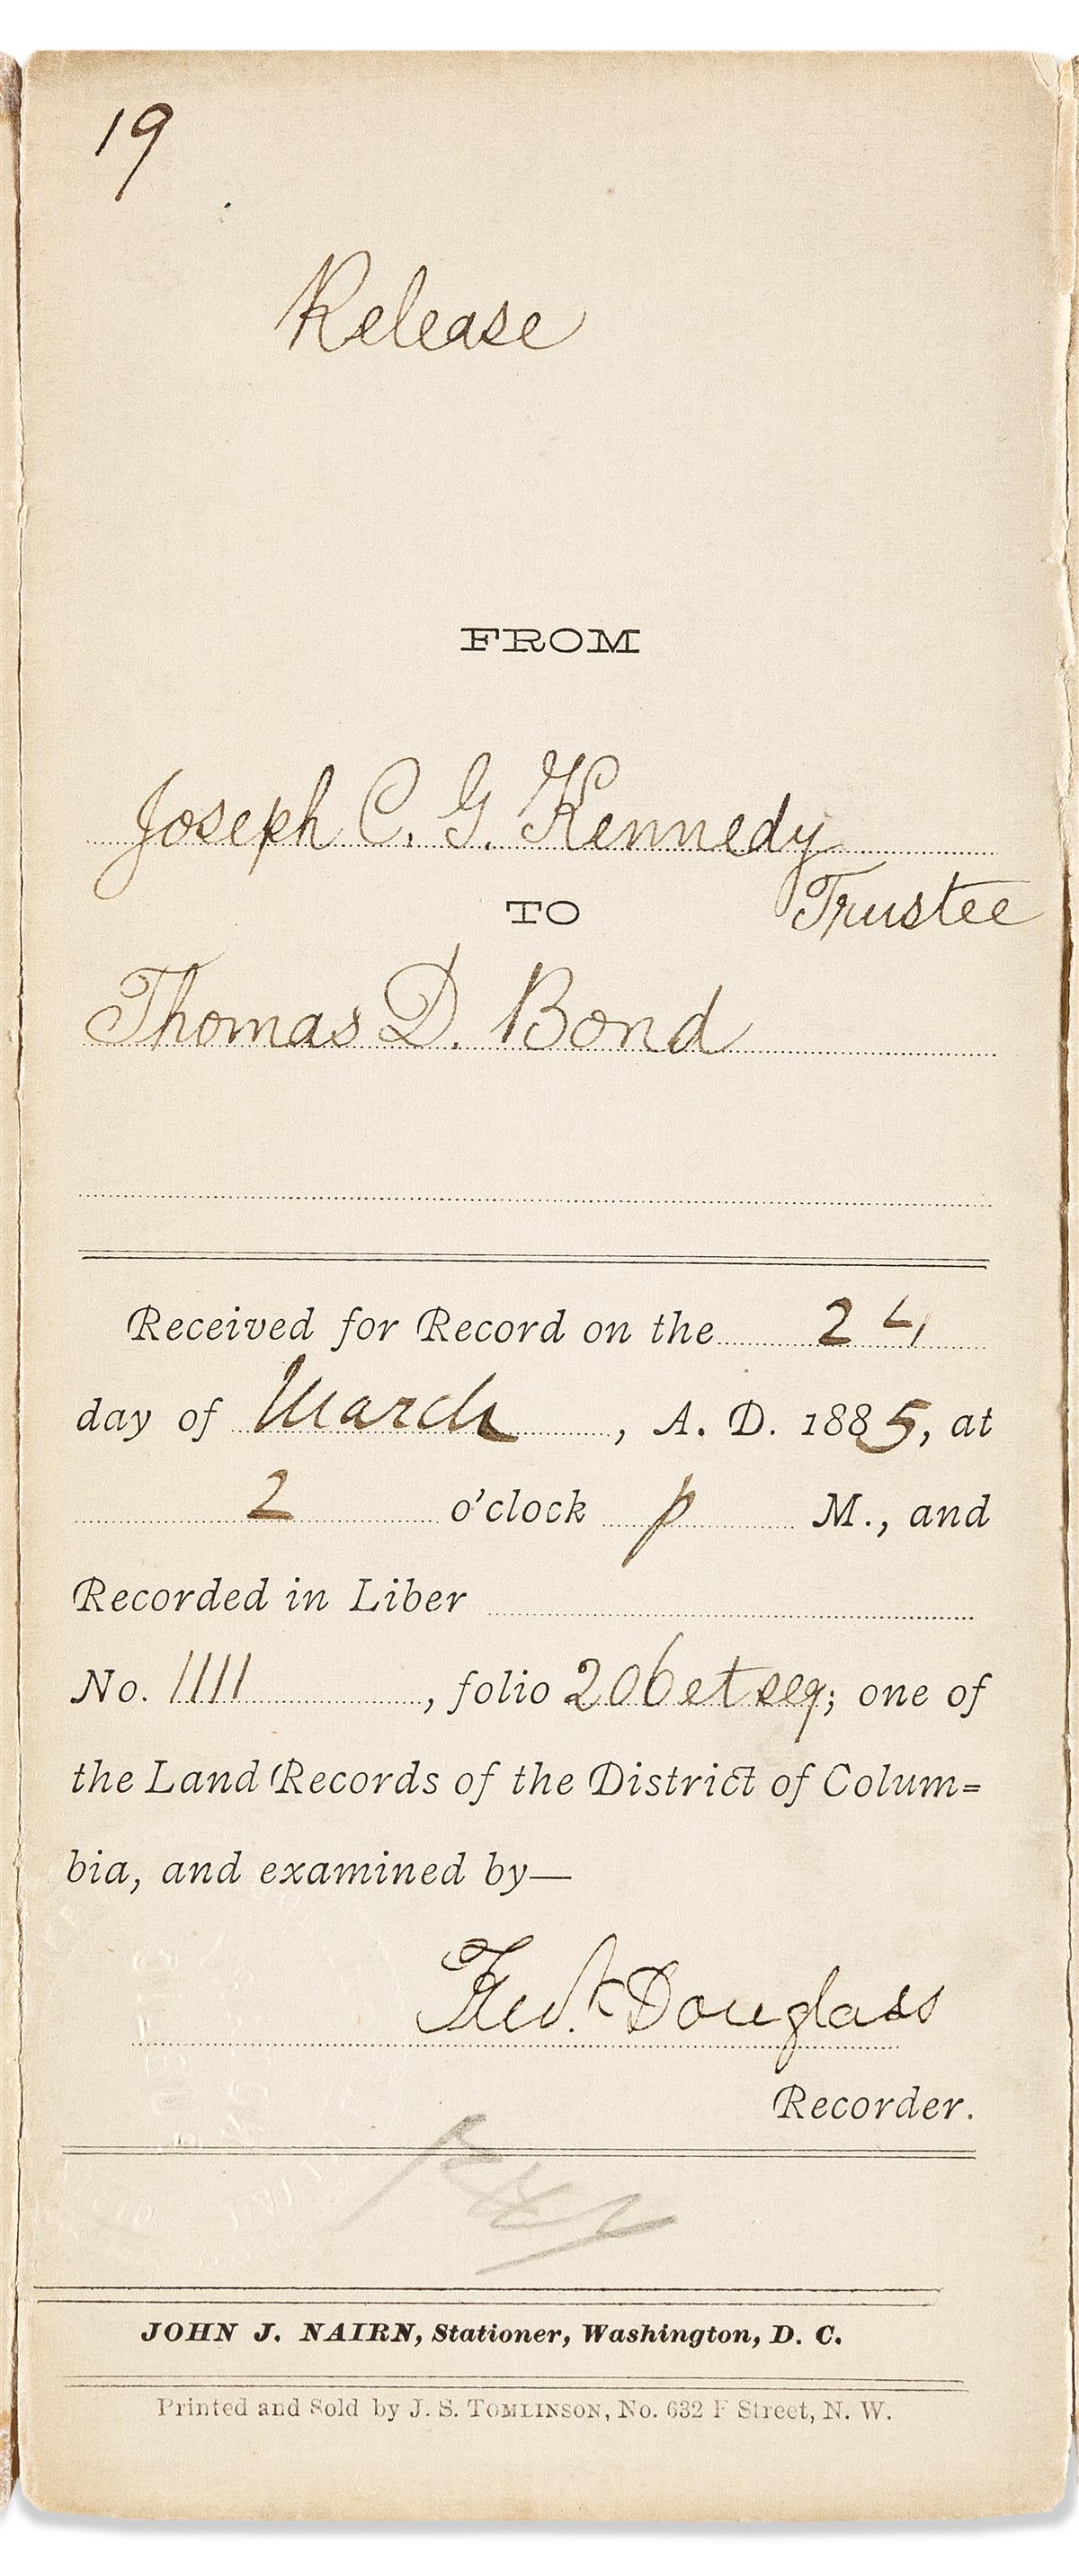 DOUGLASS, FREDERICK. Partly-printed endorsement Signed, Fredk Douglass, as Recorder of Deeds, certifying a deed